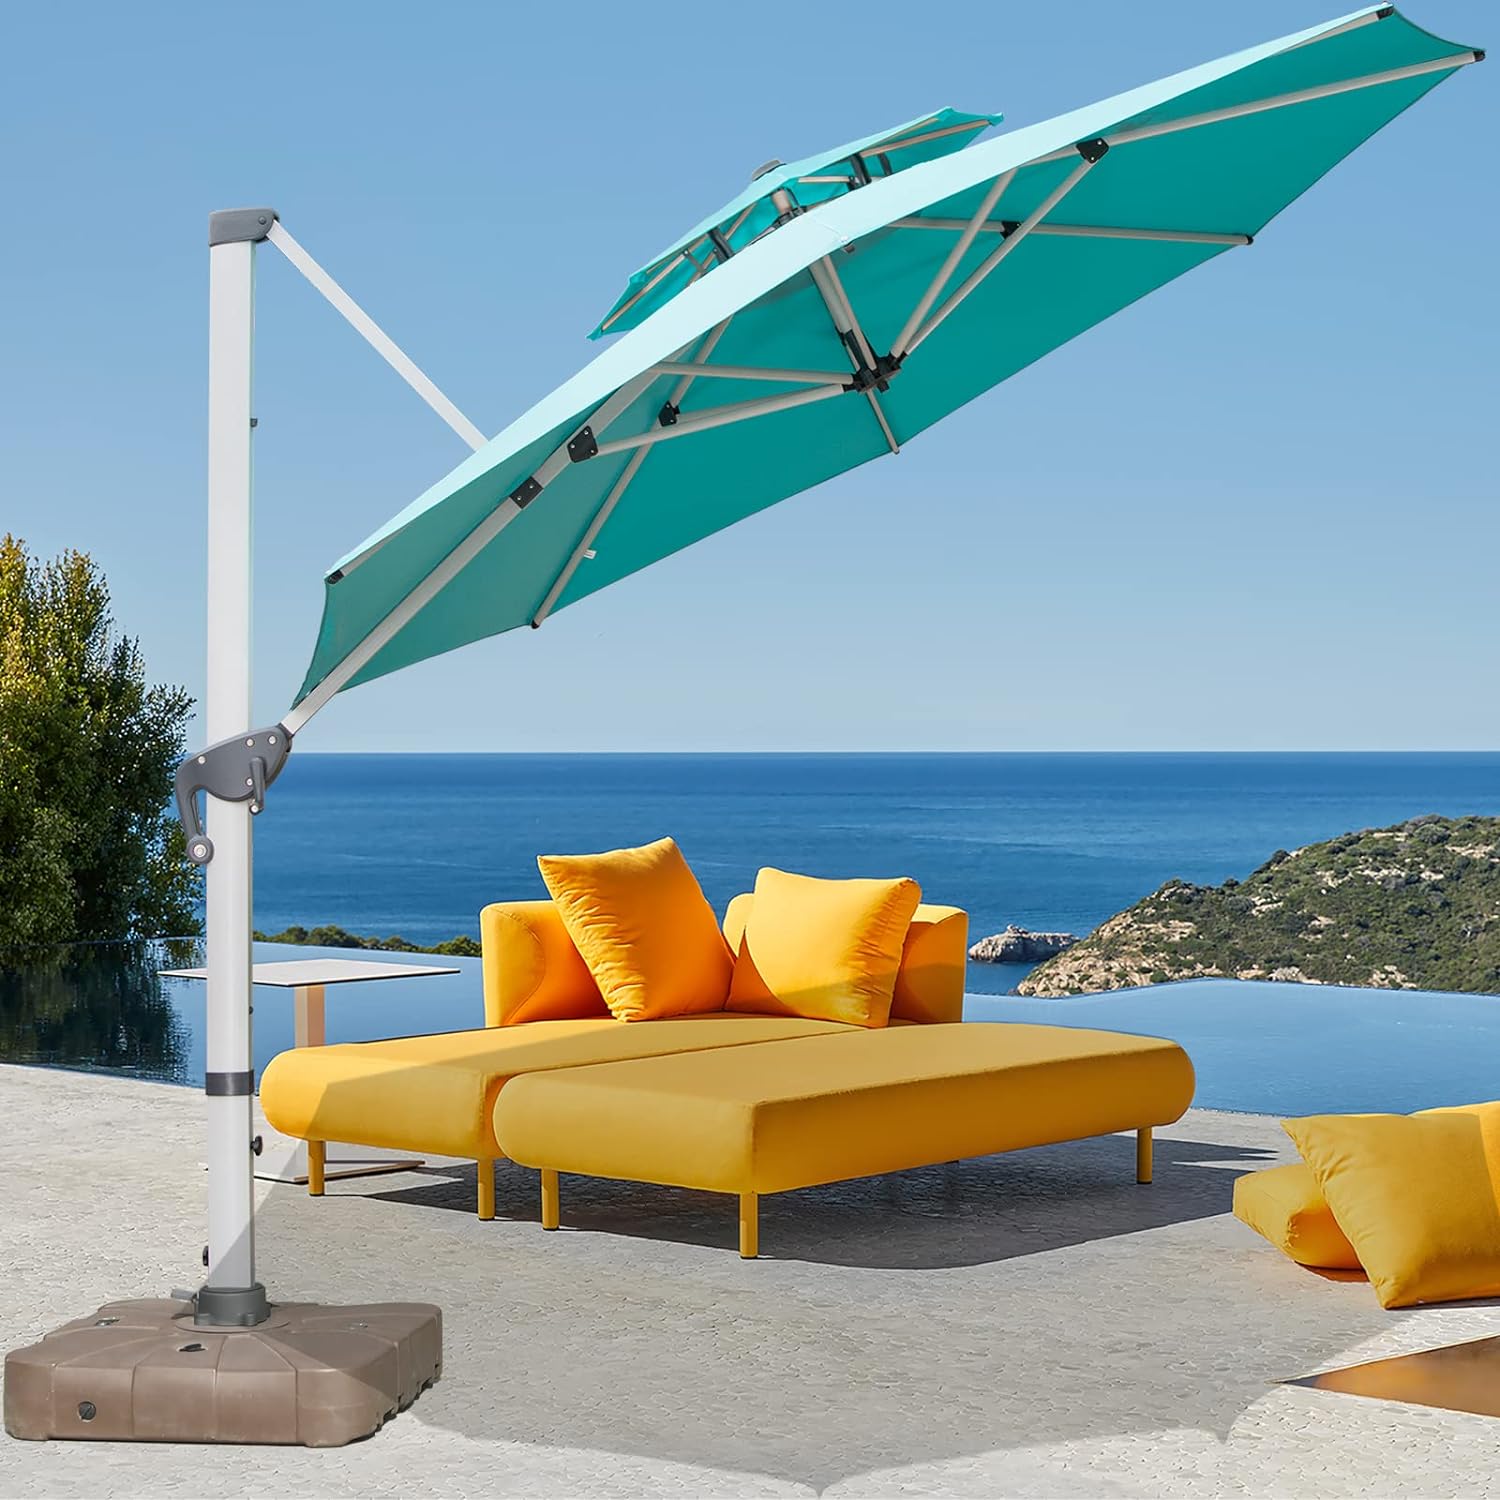 Mojia 11 FT Cantilever Patio Umbrella with Cross Base Included - 360 Rotation Offset Umbrella Large Heavy Duty Outdoor Umbrella for Pool, Turquoise Blue